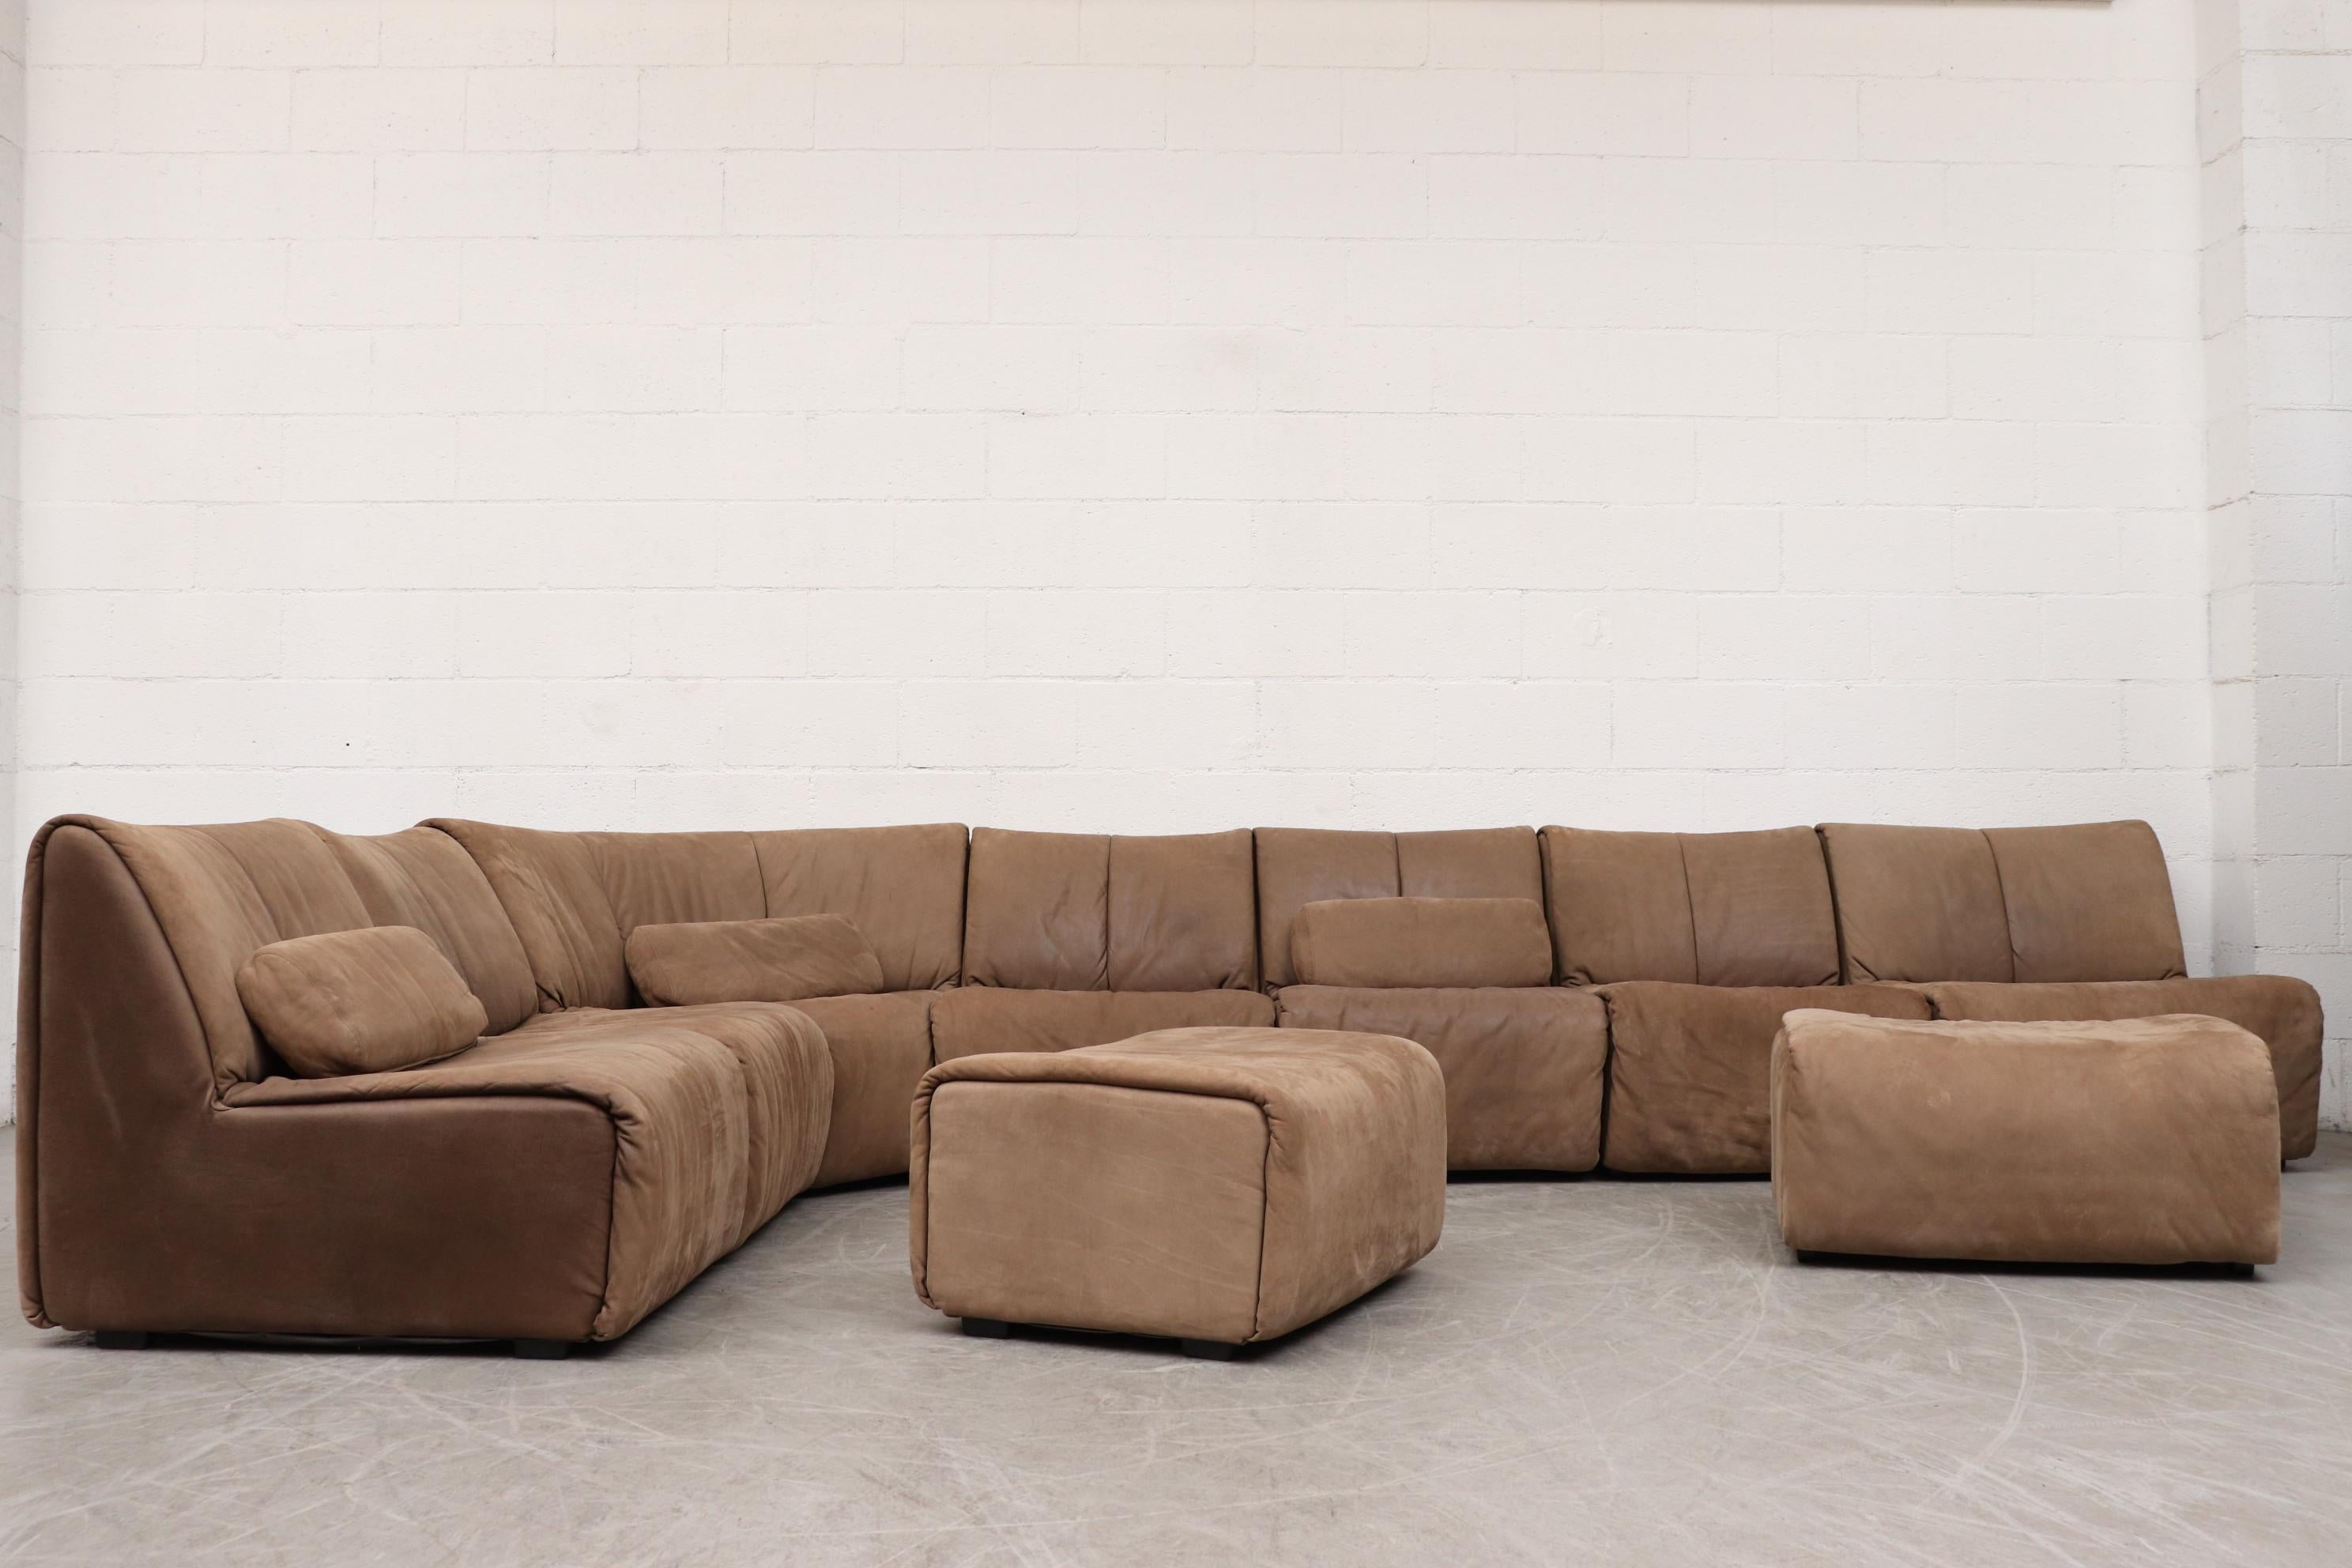 Large COR leather modular sectional sofa with 2 ottomans. 7 sofa pieces, and 3 pillows. In original condition with some visible wear, consistent with age and use. Color may vary slightly from photo.